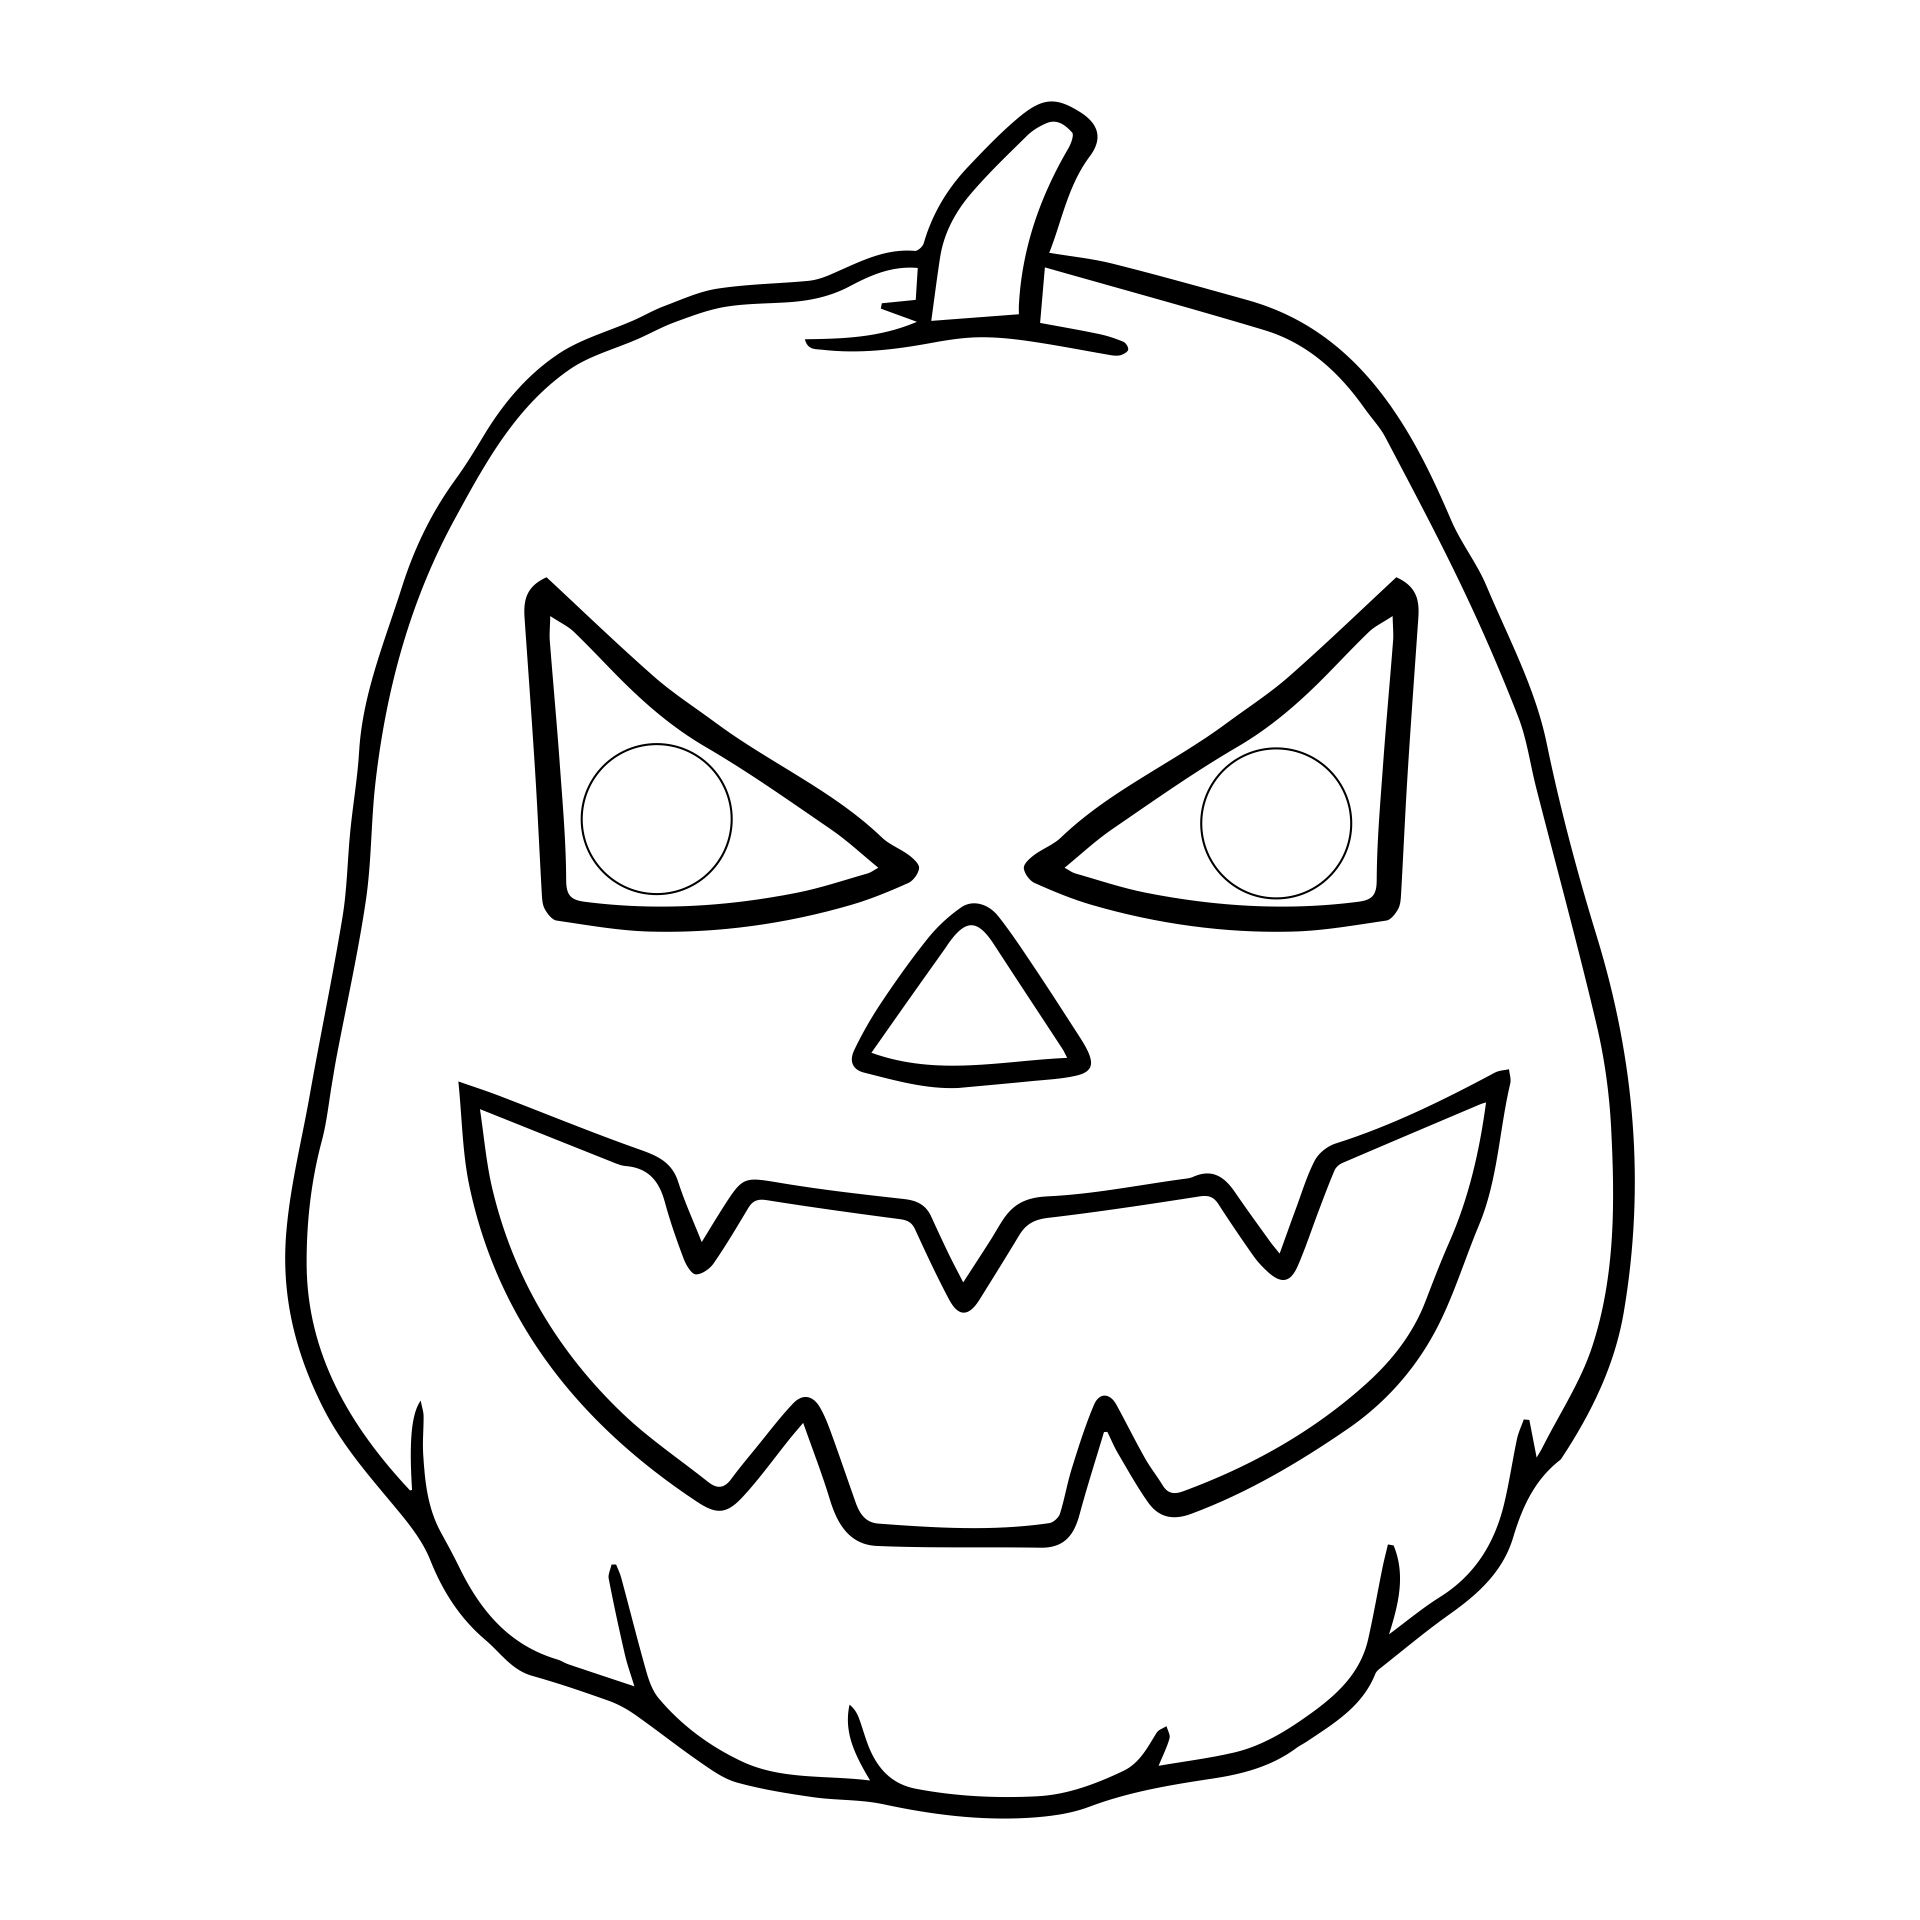 15-best-halloween-mask-printable-coloring-pages-for-free-at-printablee